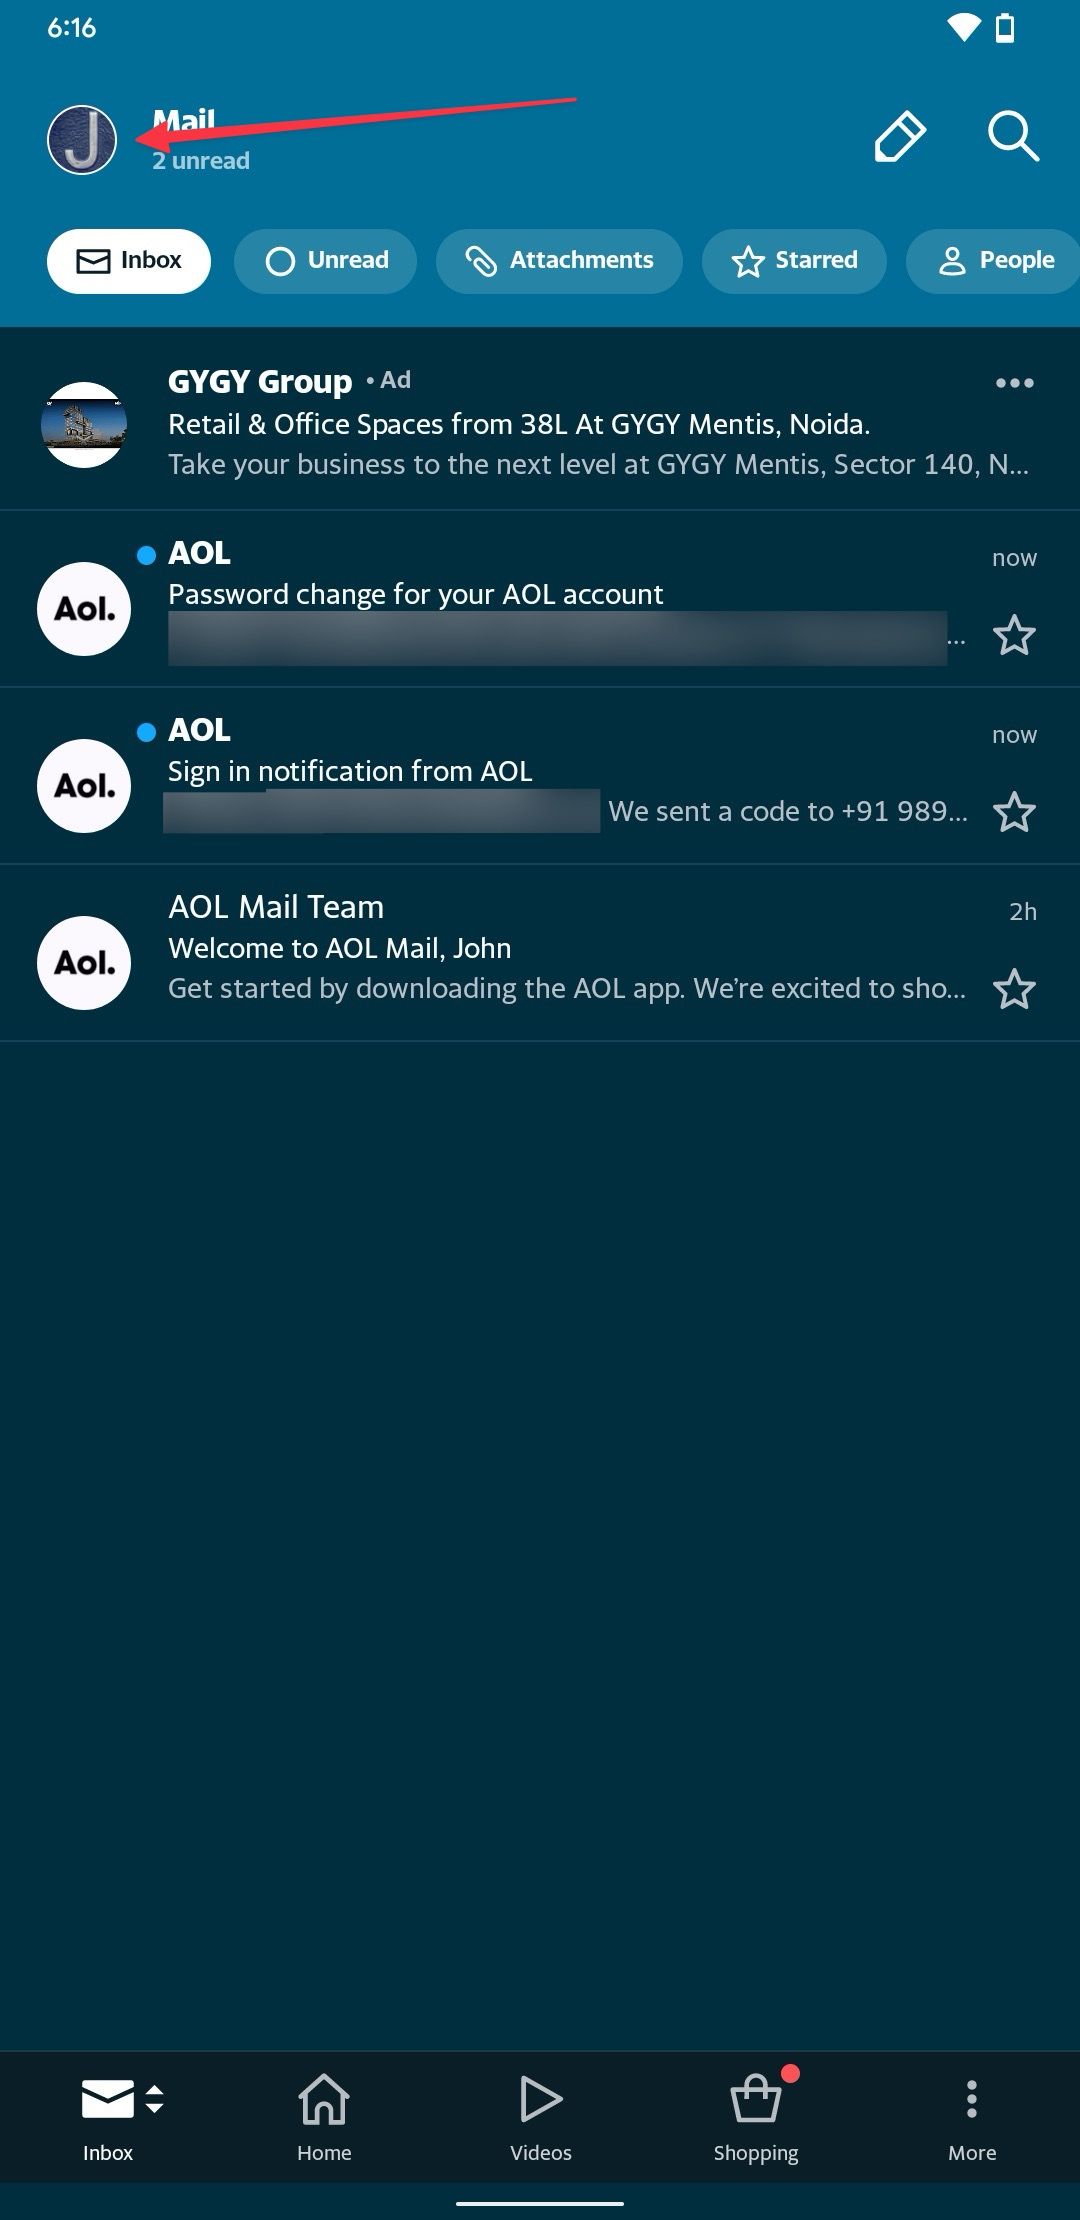 AOL Android app home page screenshot